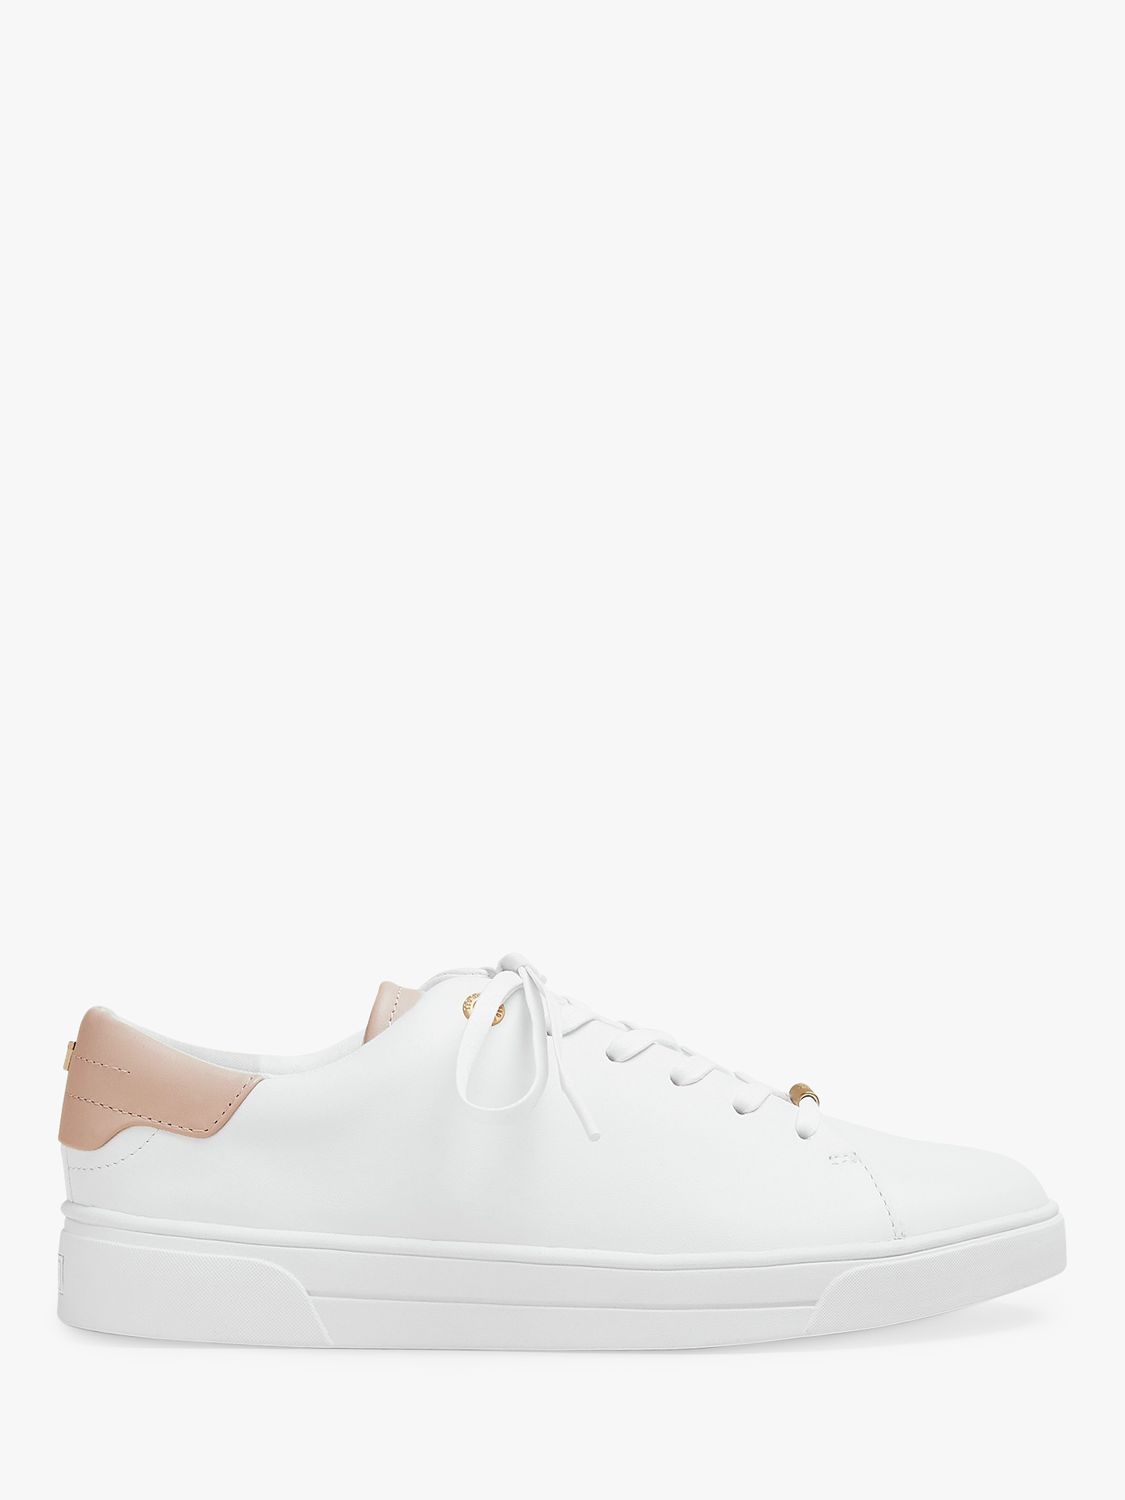 Ted Baker Zenib Leather Trainers, White/Pink